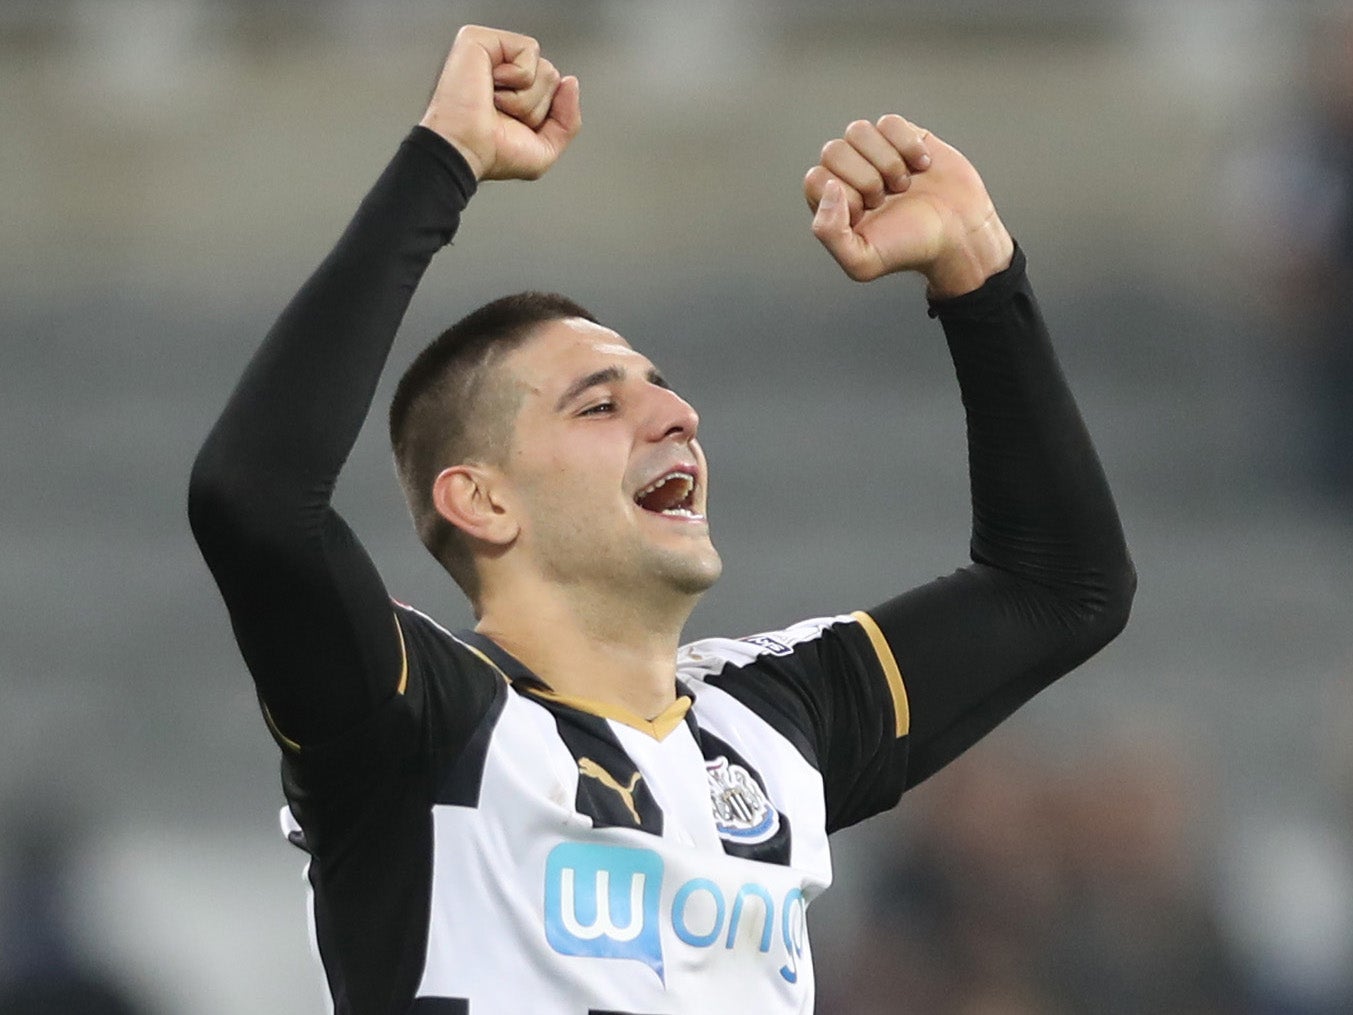 Mitrovic scored twice for the Magpies